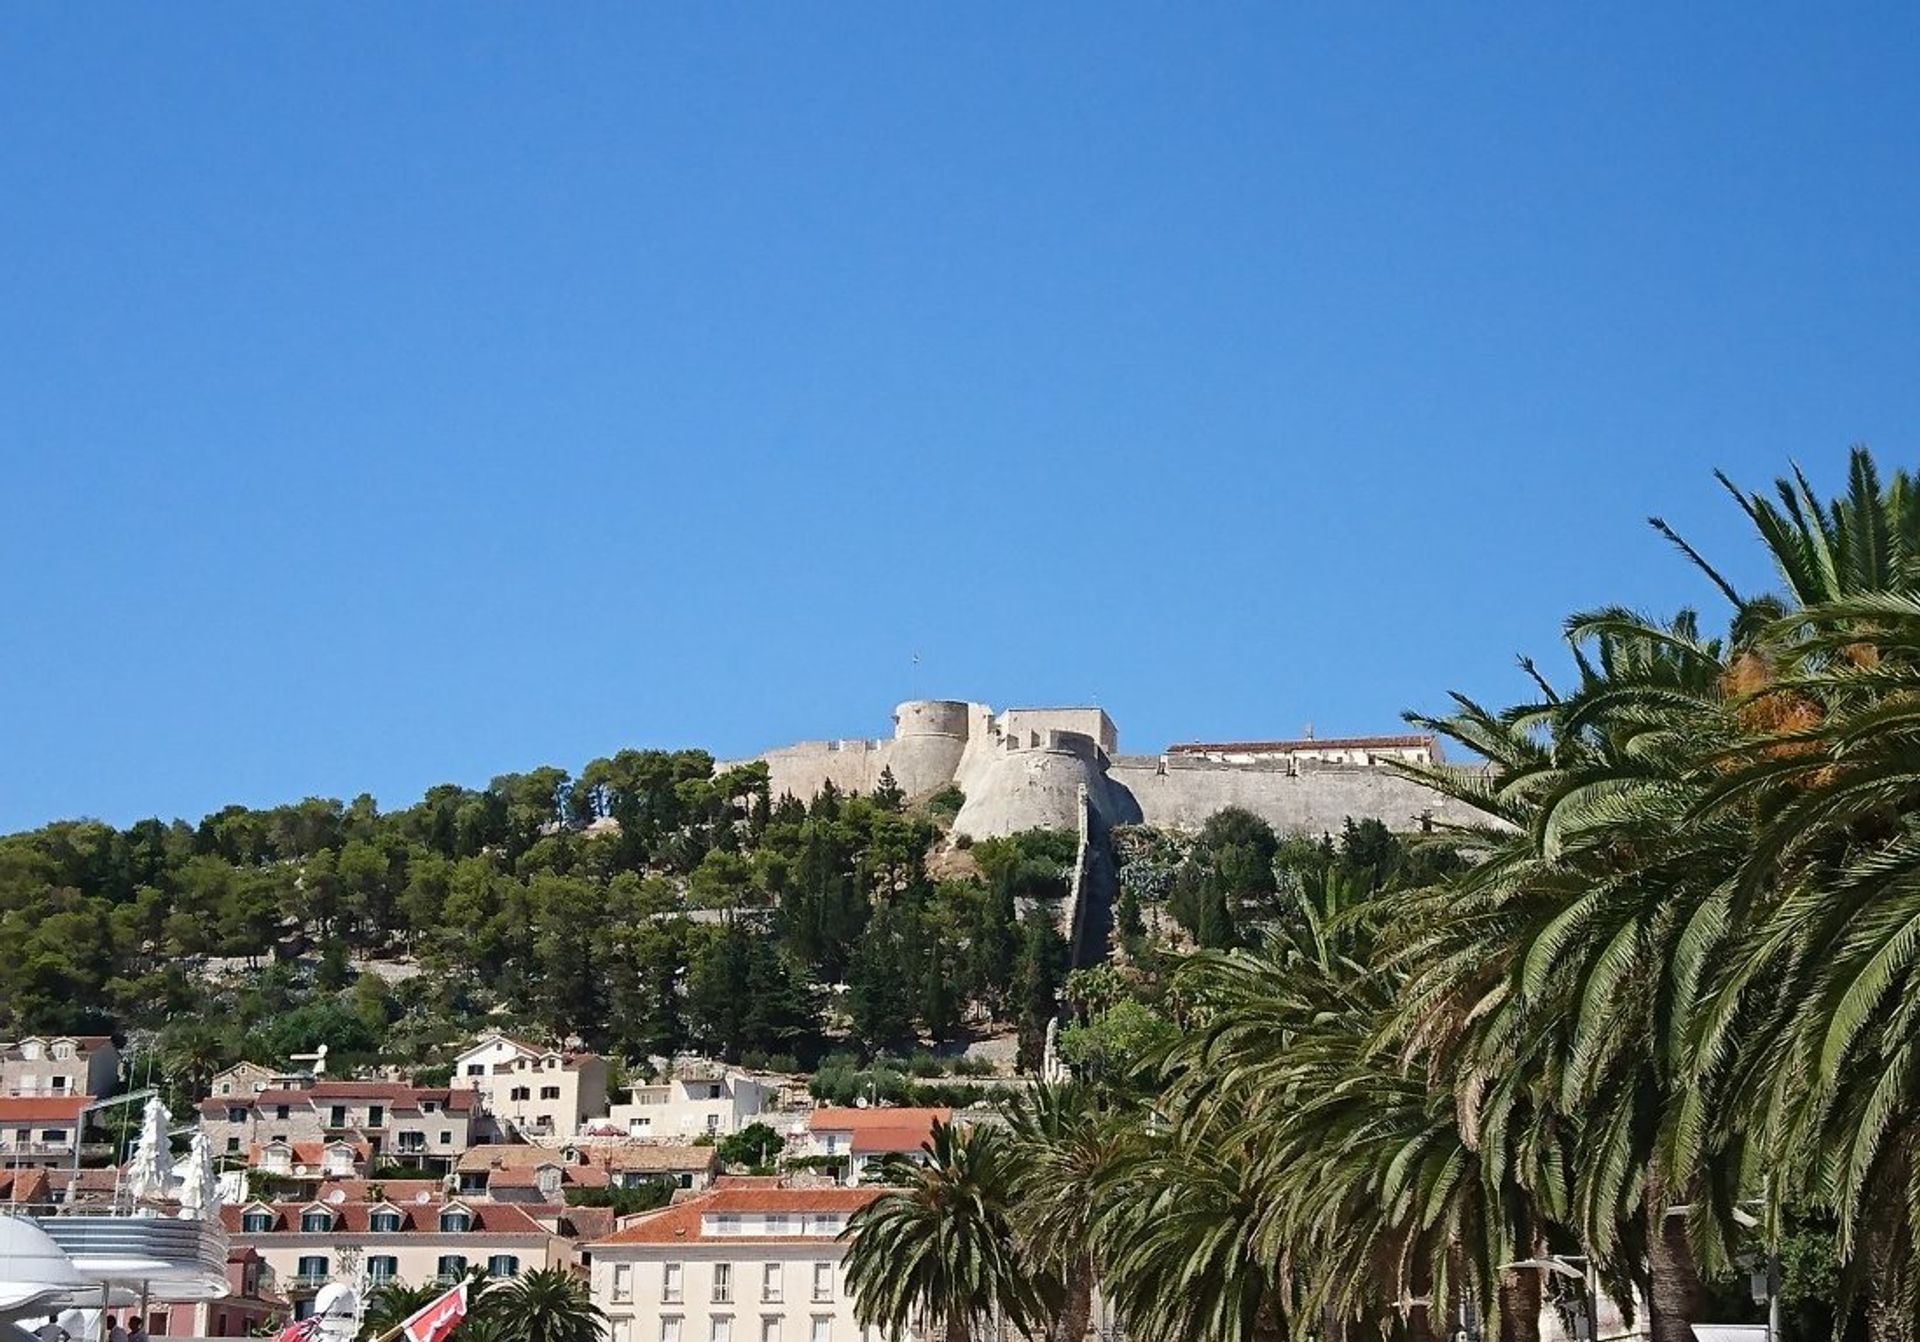 Take a trip to Hvar's Fortica Fortress and enjoy stunning panoramic views from the top